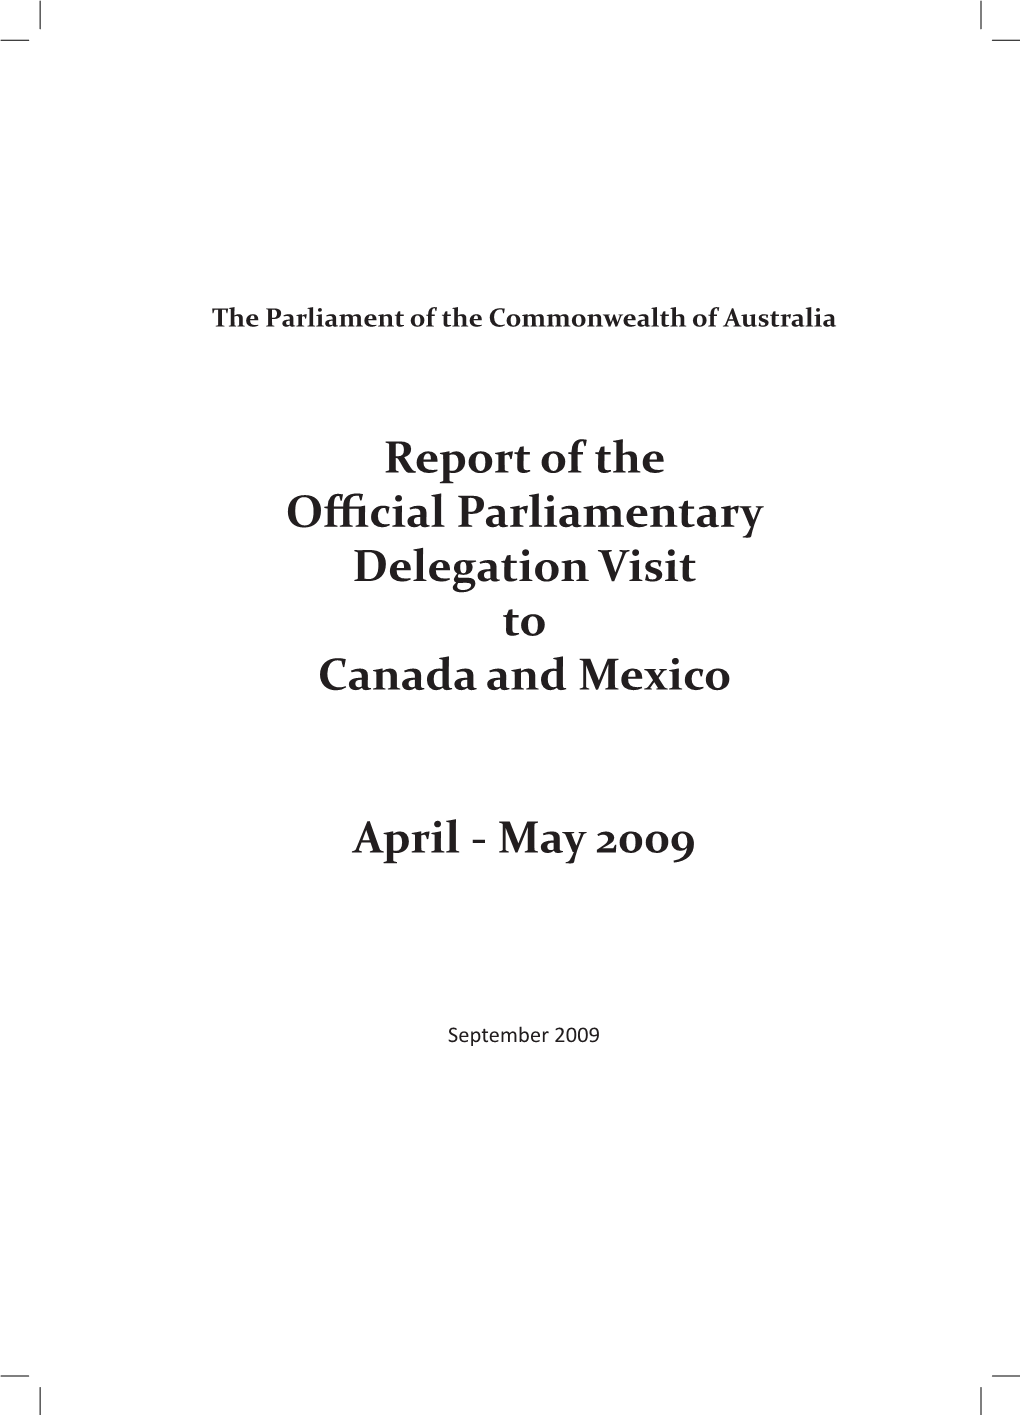 Report of the Official Parliamentary Delegation Visit to Canada and Mexico